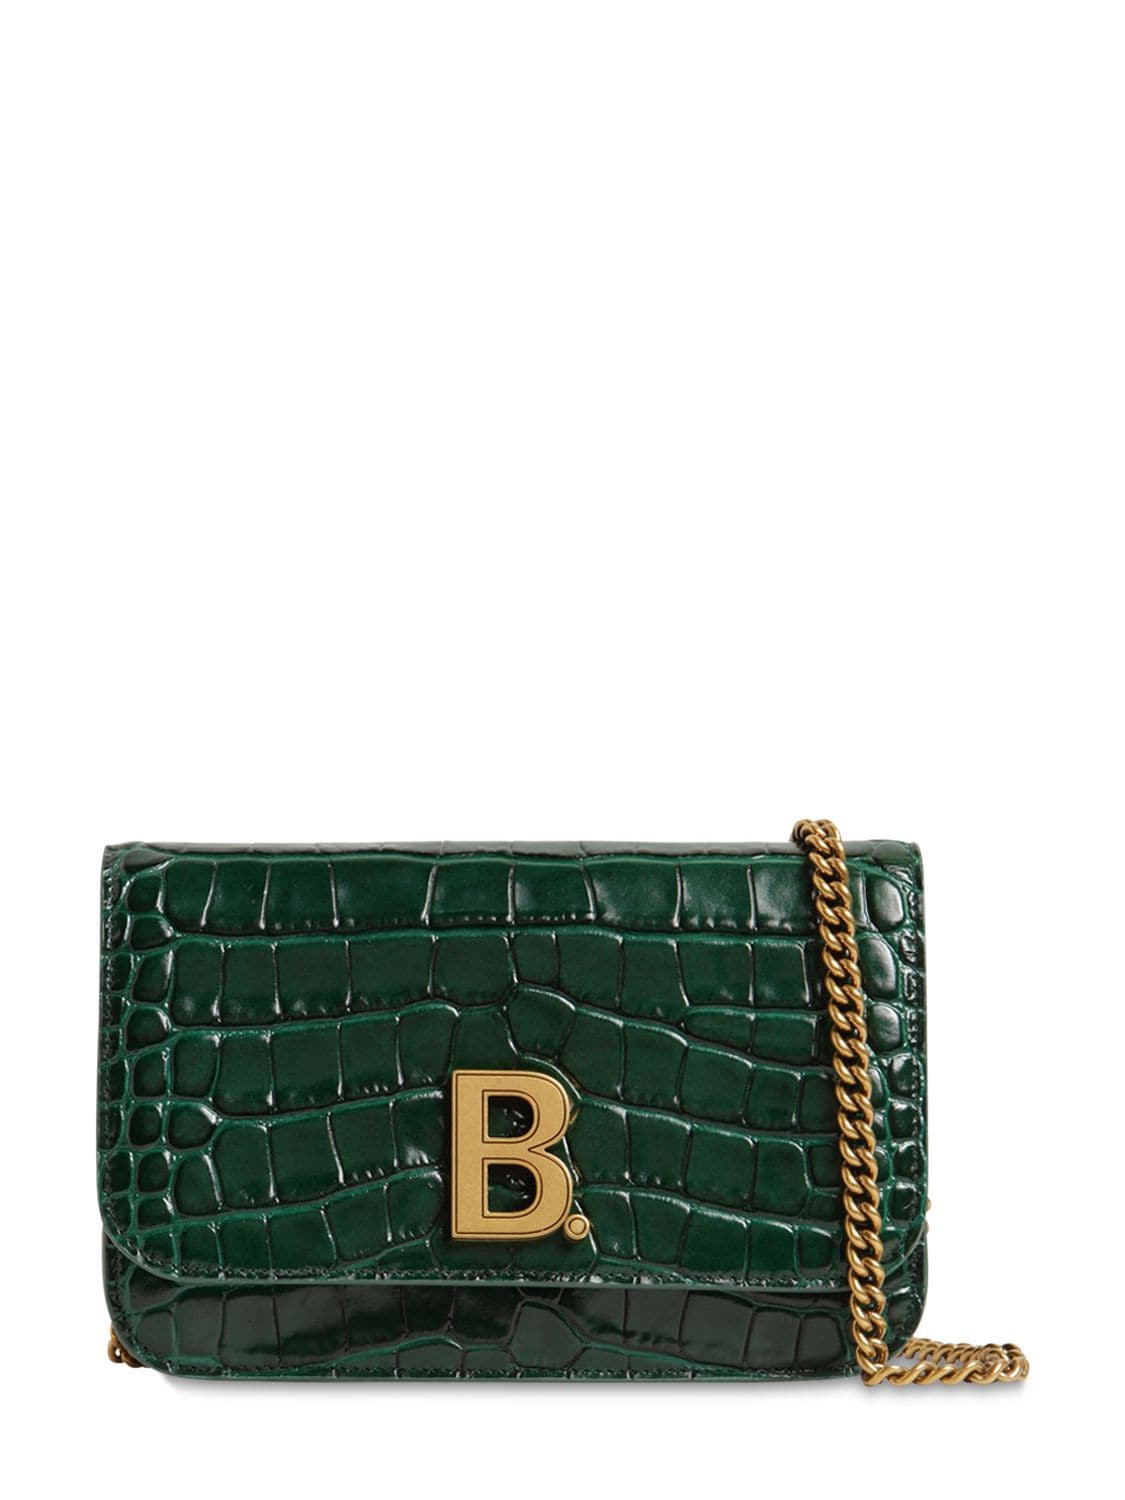 Balenciaga Bdot Croc Embossed Leather Chain Wallet In Forest Green